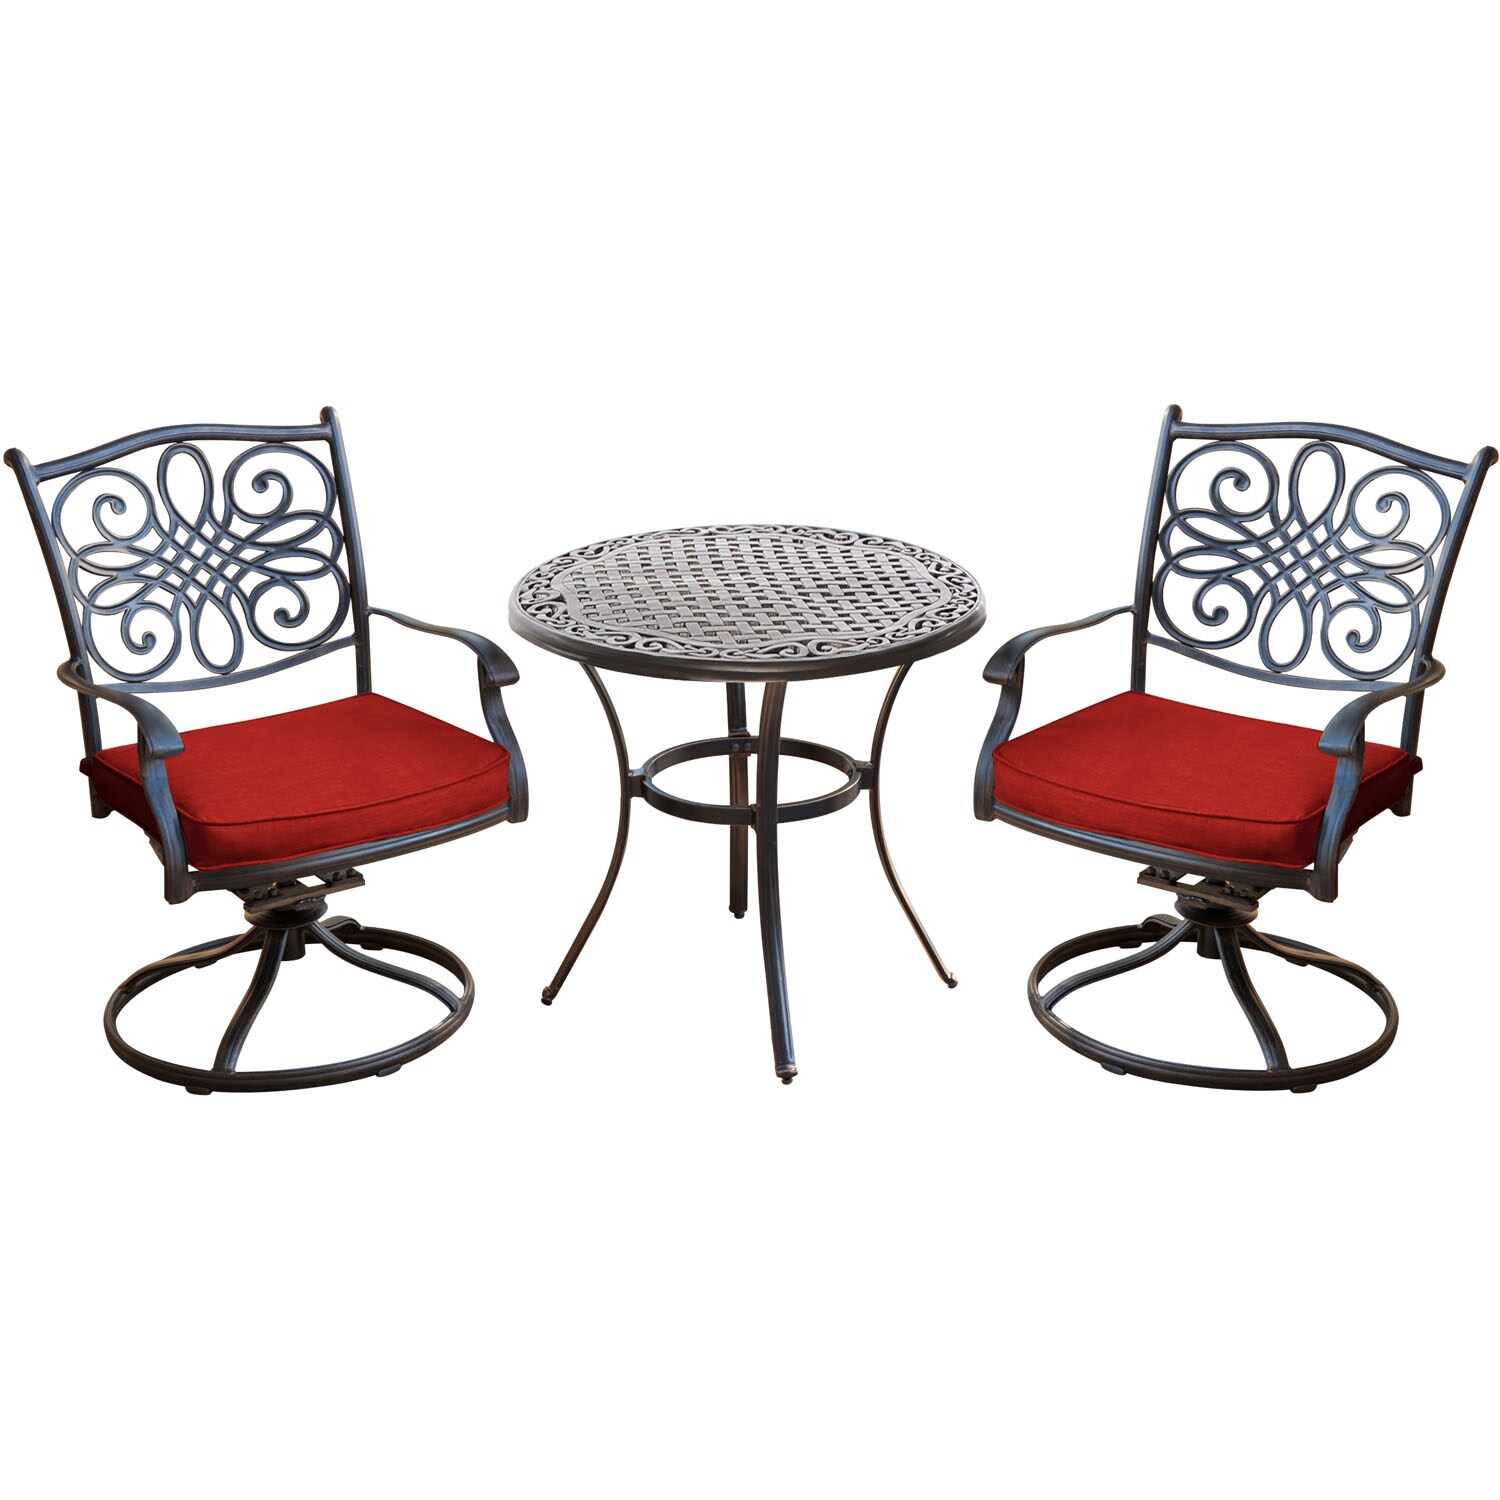 Hanover Traditions 3-Piece Patio Conversation Set with Cushions